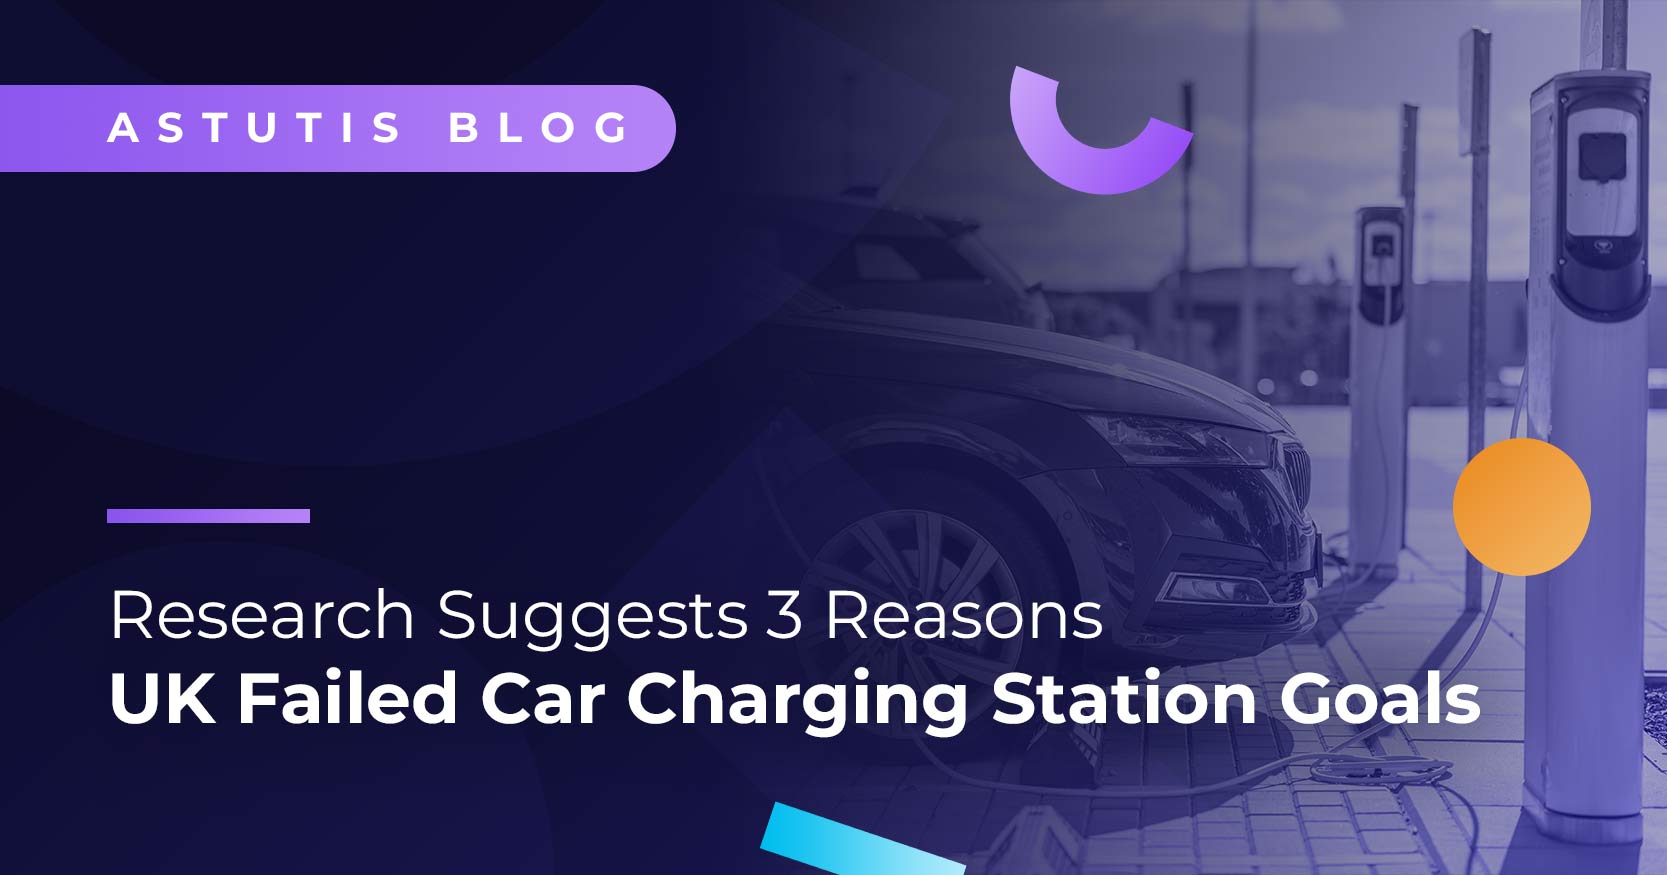 Research Suggests 3 Reasons UK Failed Automobile Recharging Station Goals Slide